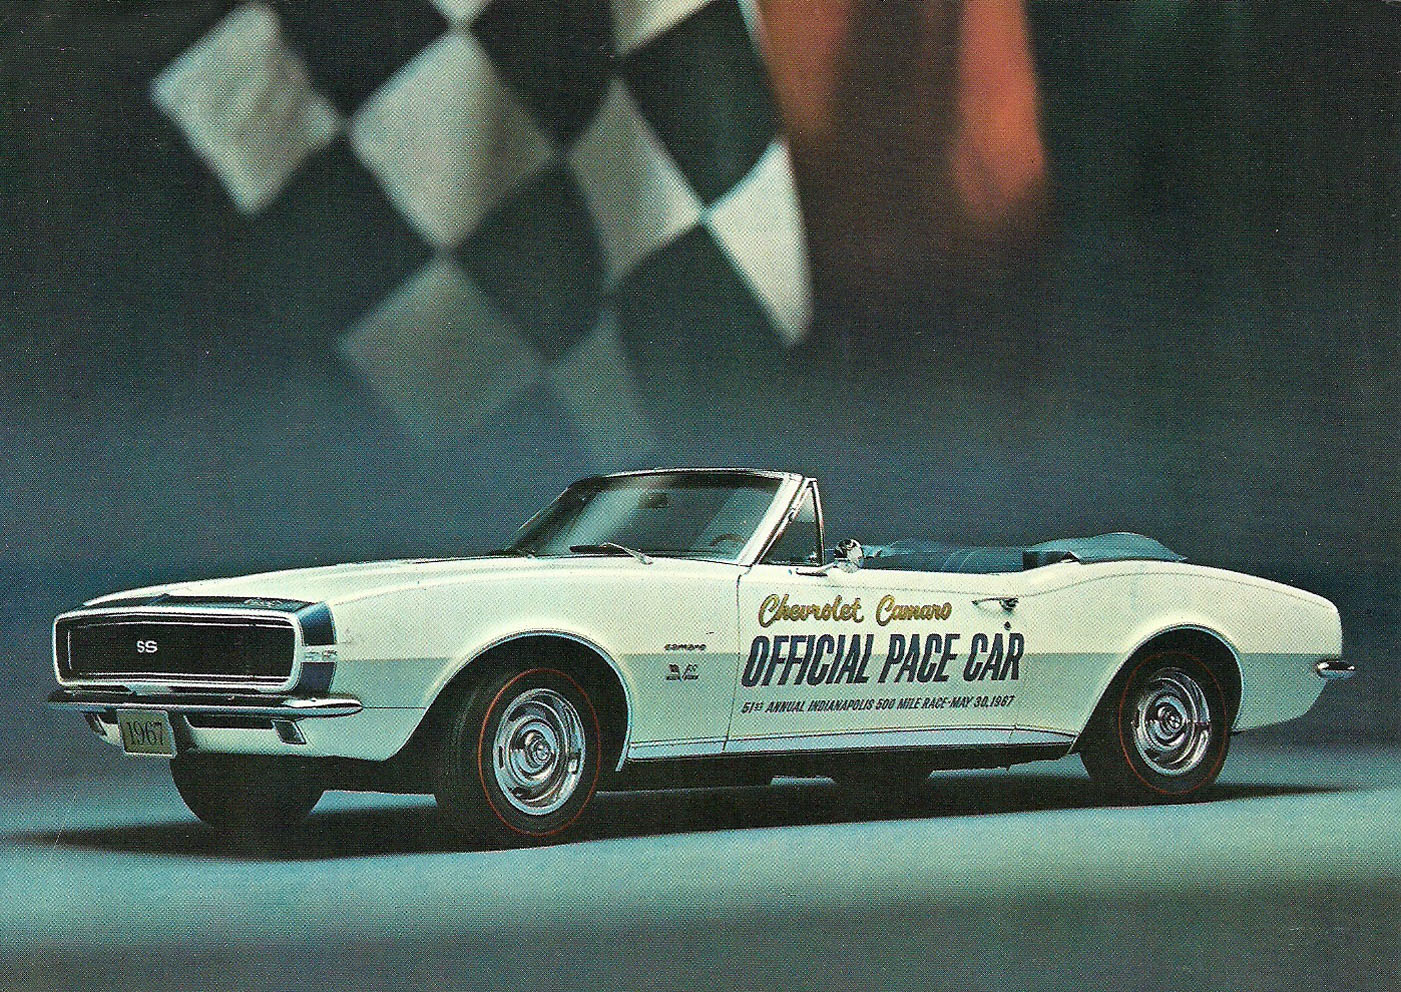 1967 Camaro Official Pace Car